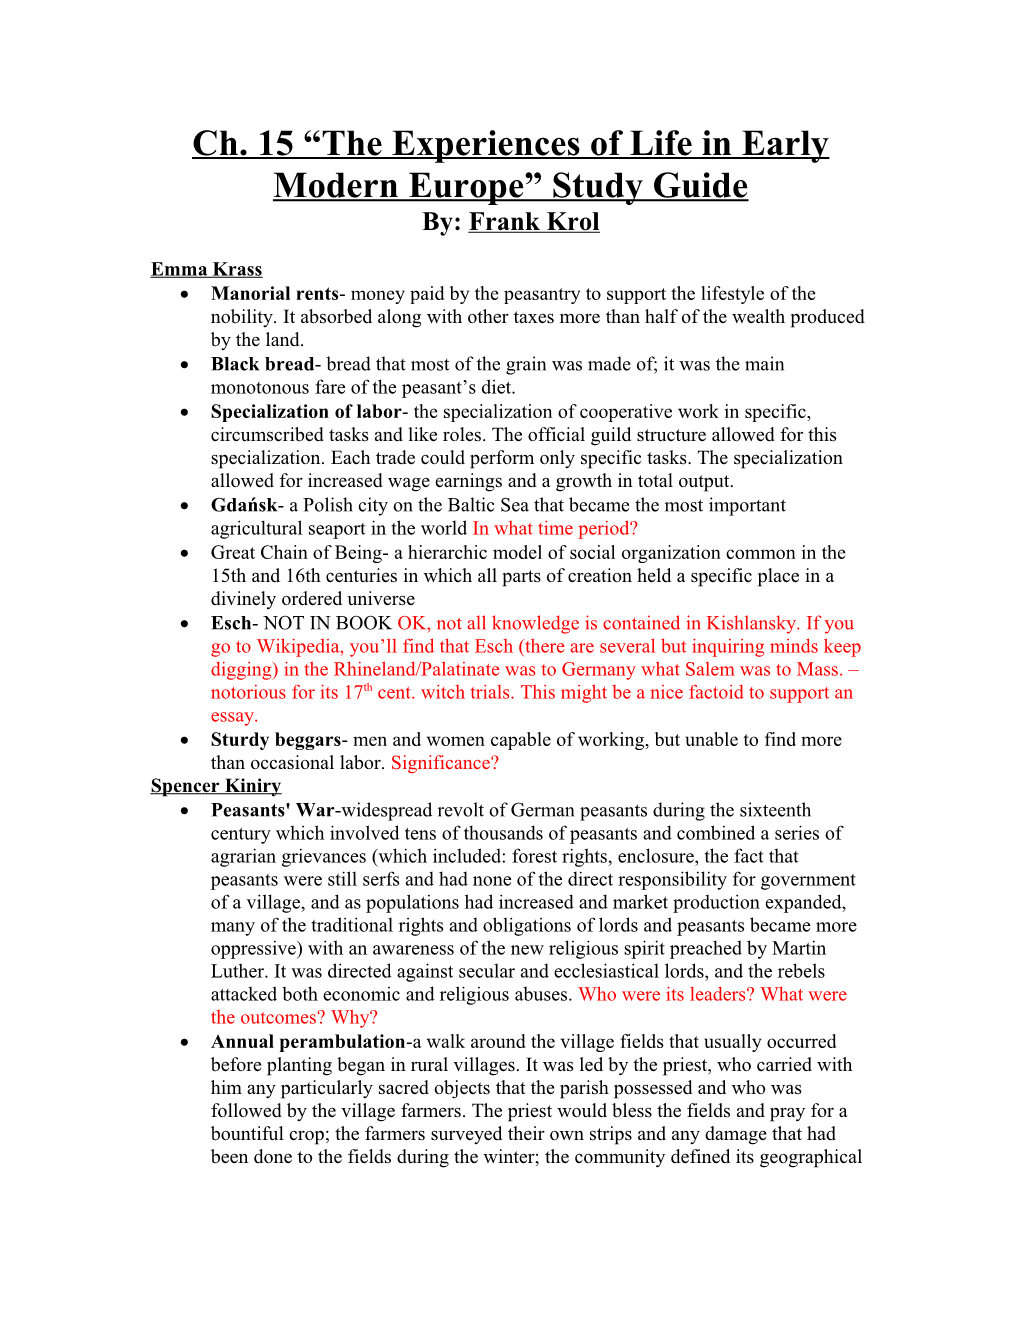 Ch. 15 the Experiences of Life in Early Modern Europe Study Guide